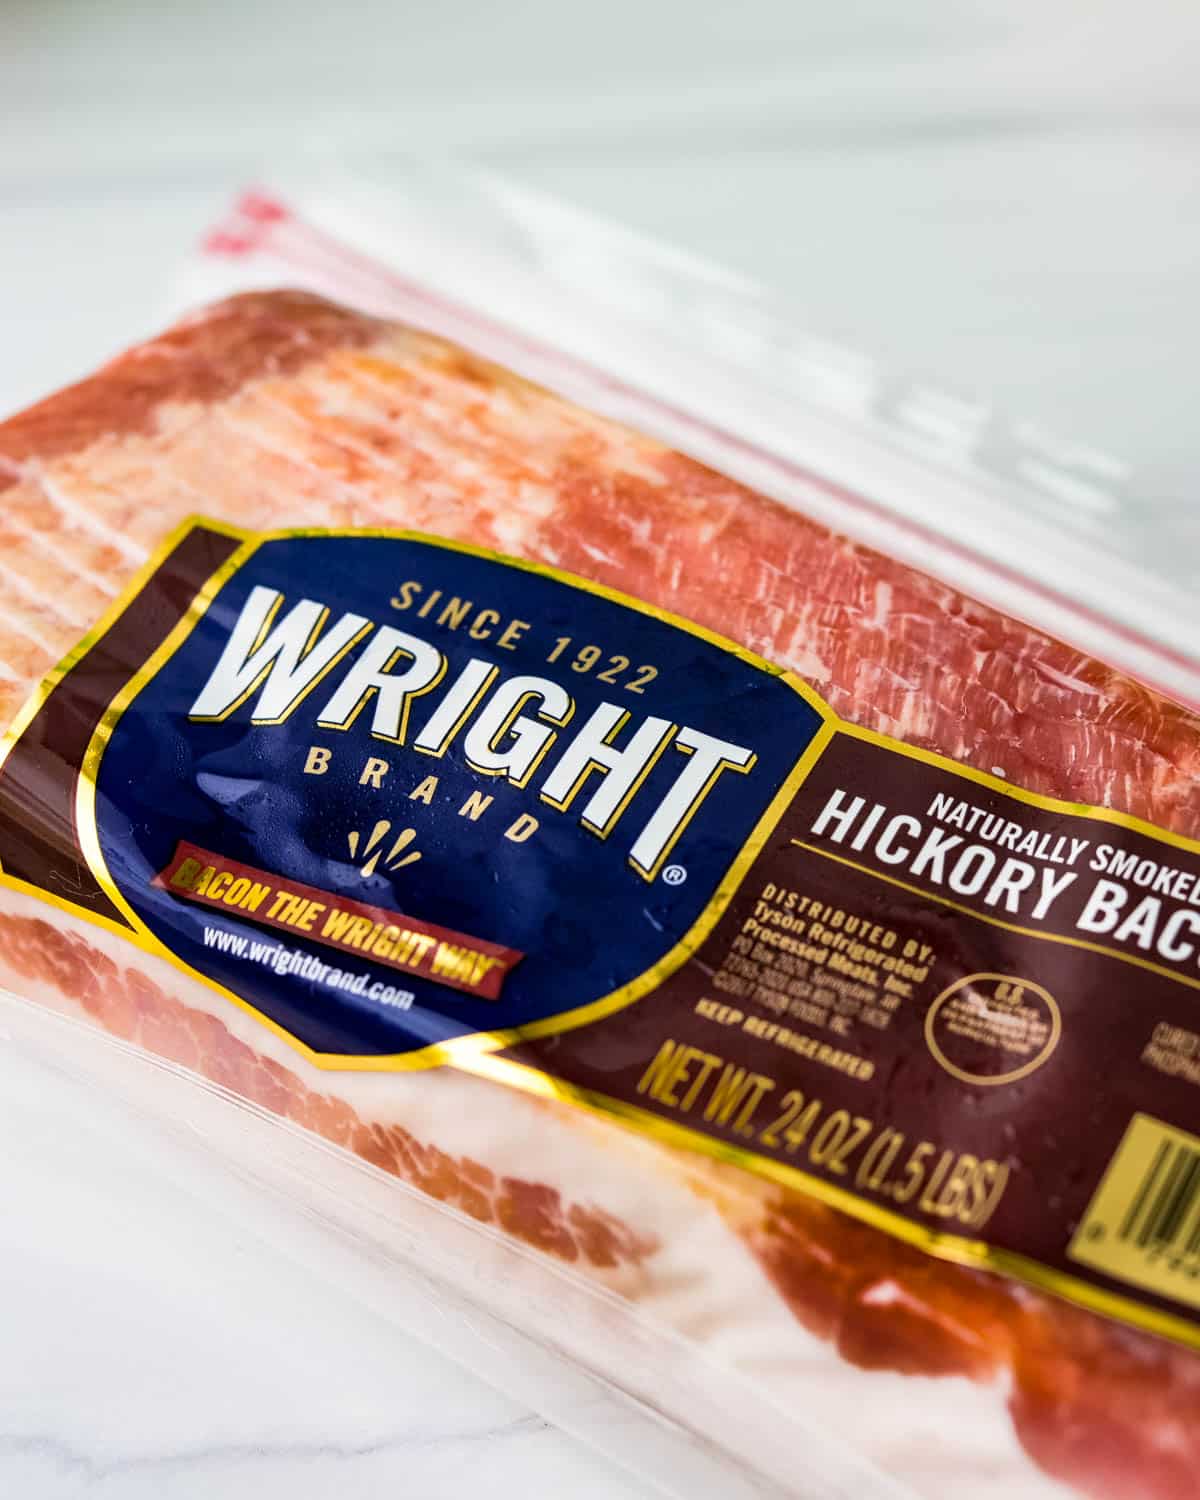 A package of Wright brand Hickory Smoked Bacon.